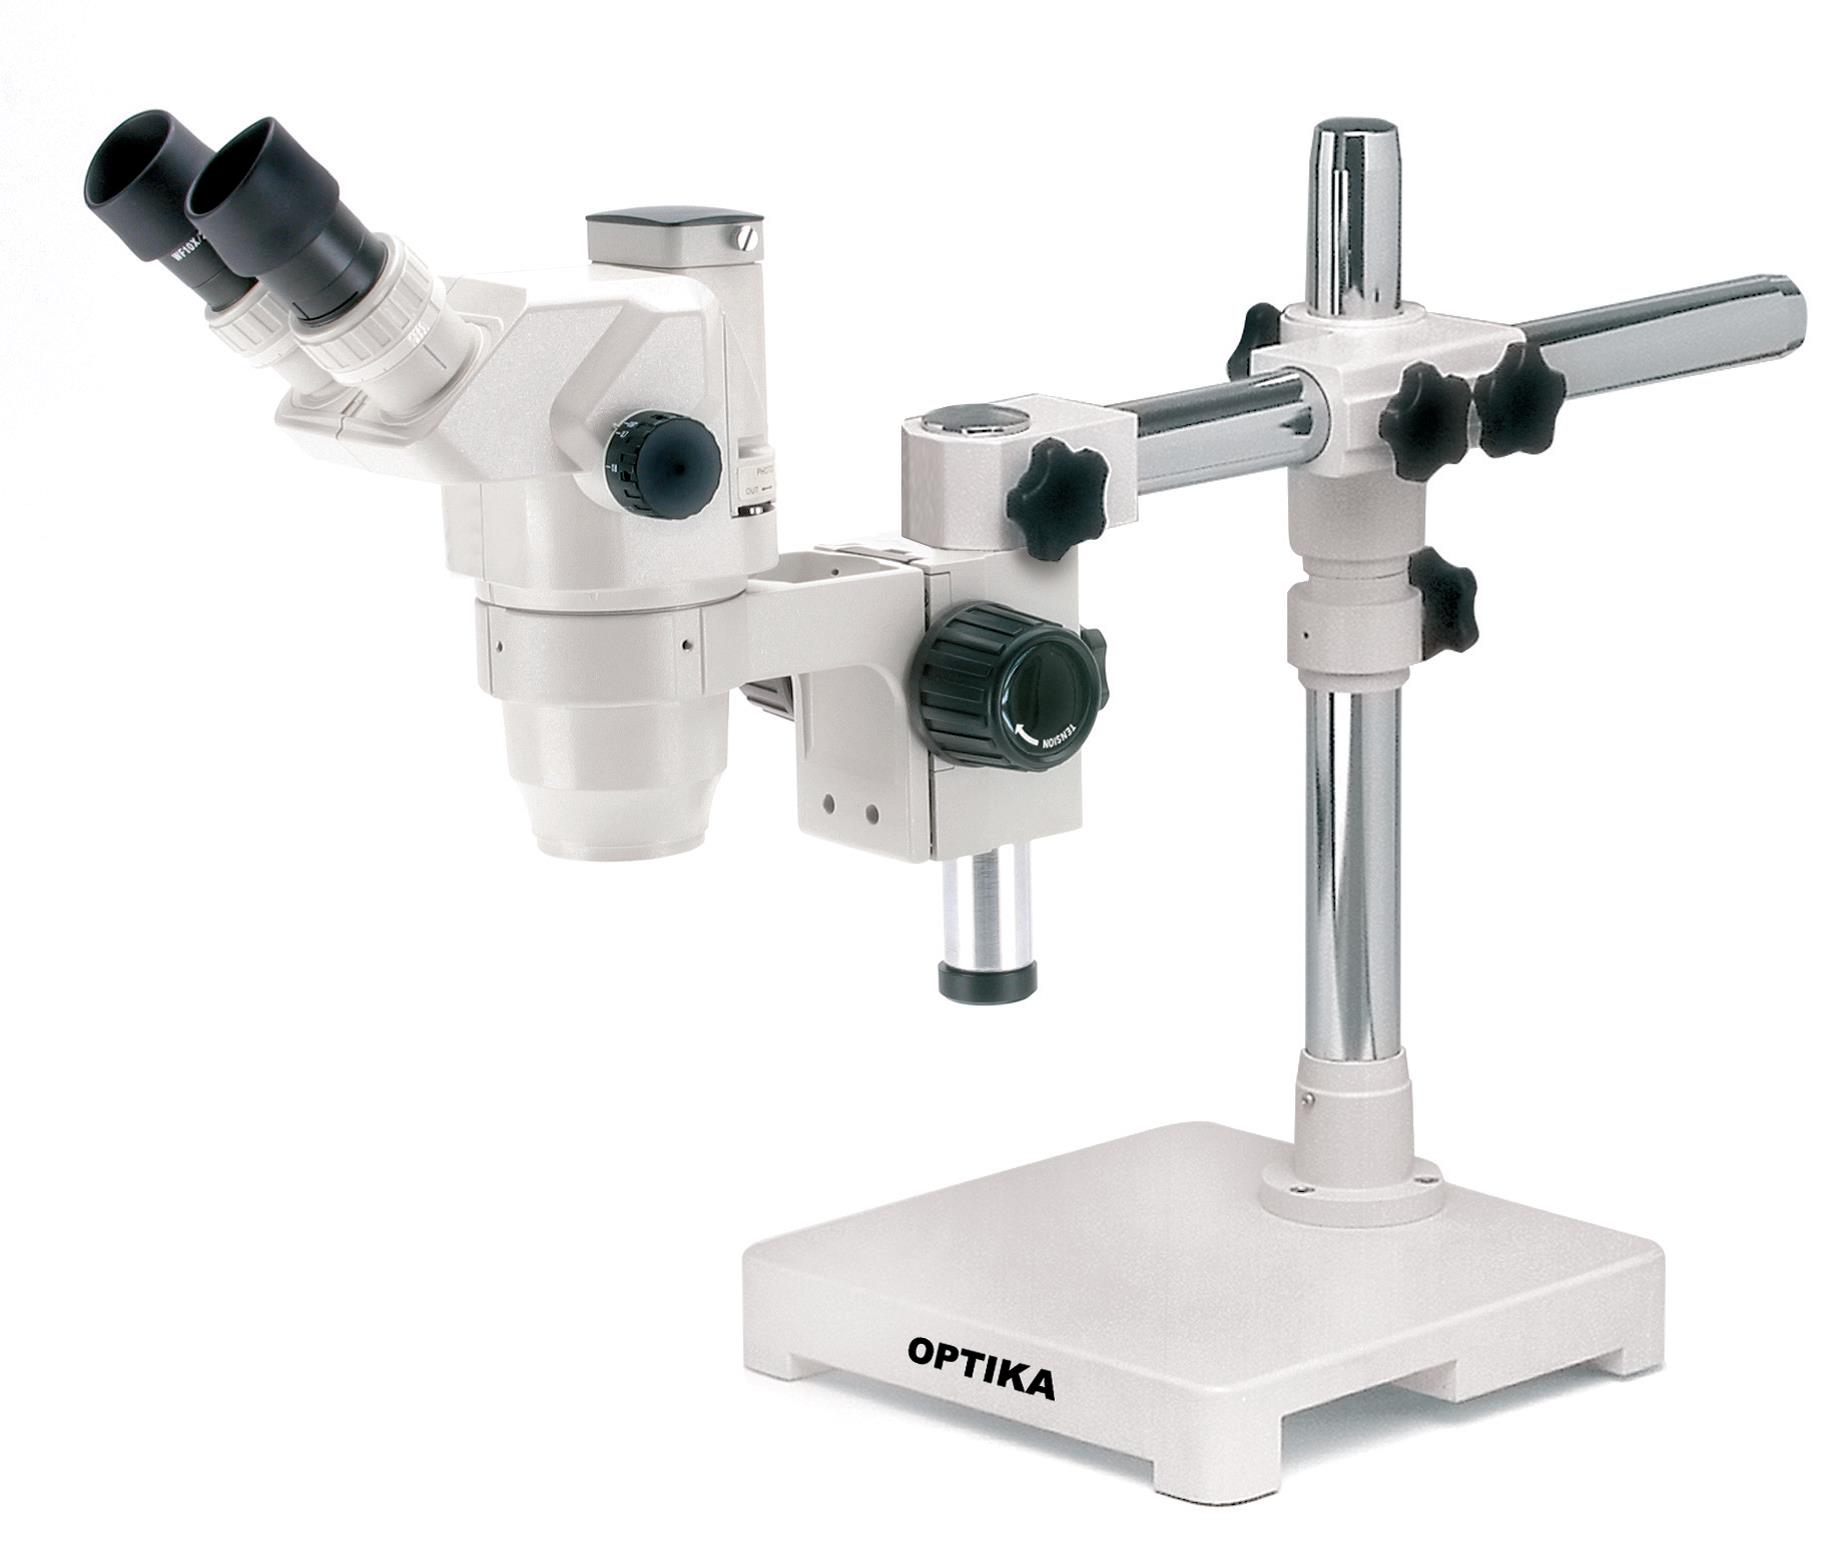 OPTIKA SZR-12 Stereo Microscope with Boom Stand - DISCONTINUED - NEW CONDITION